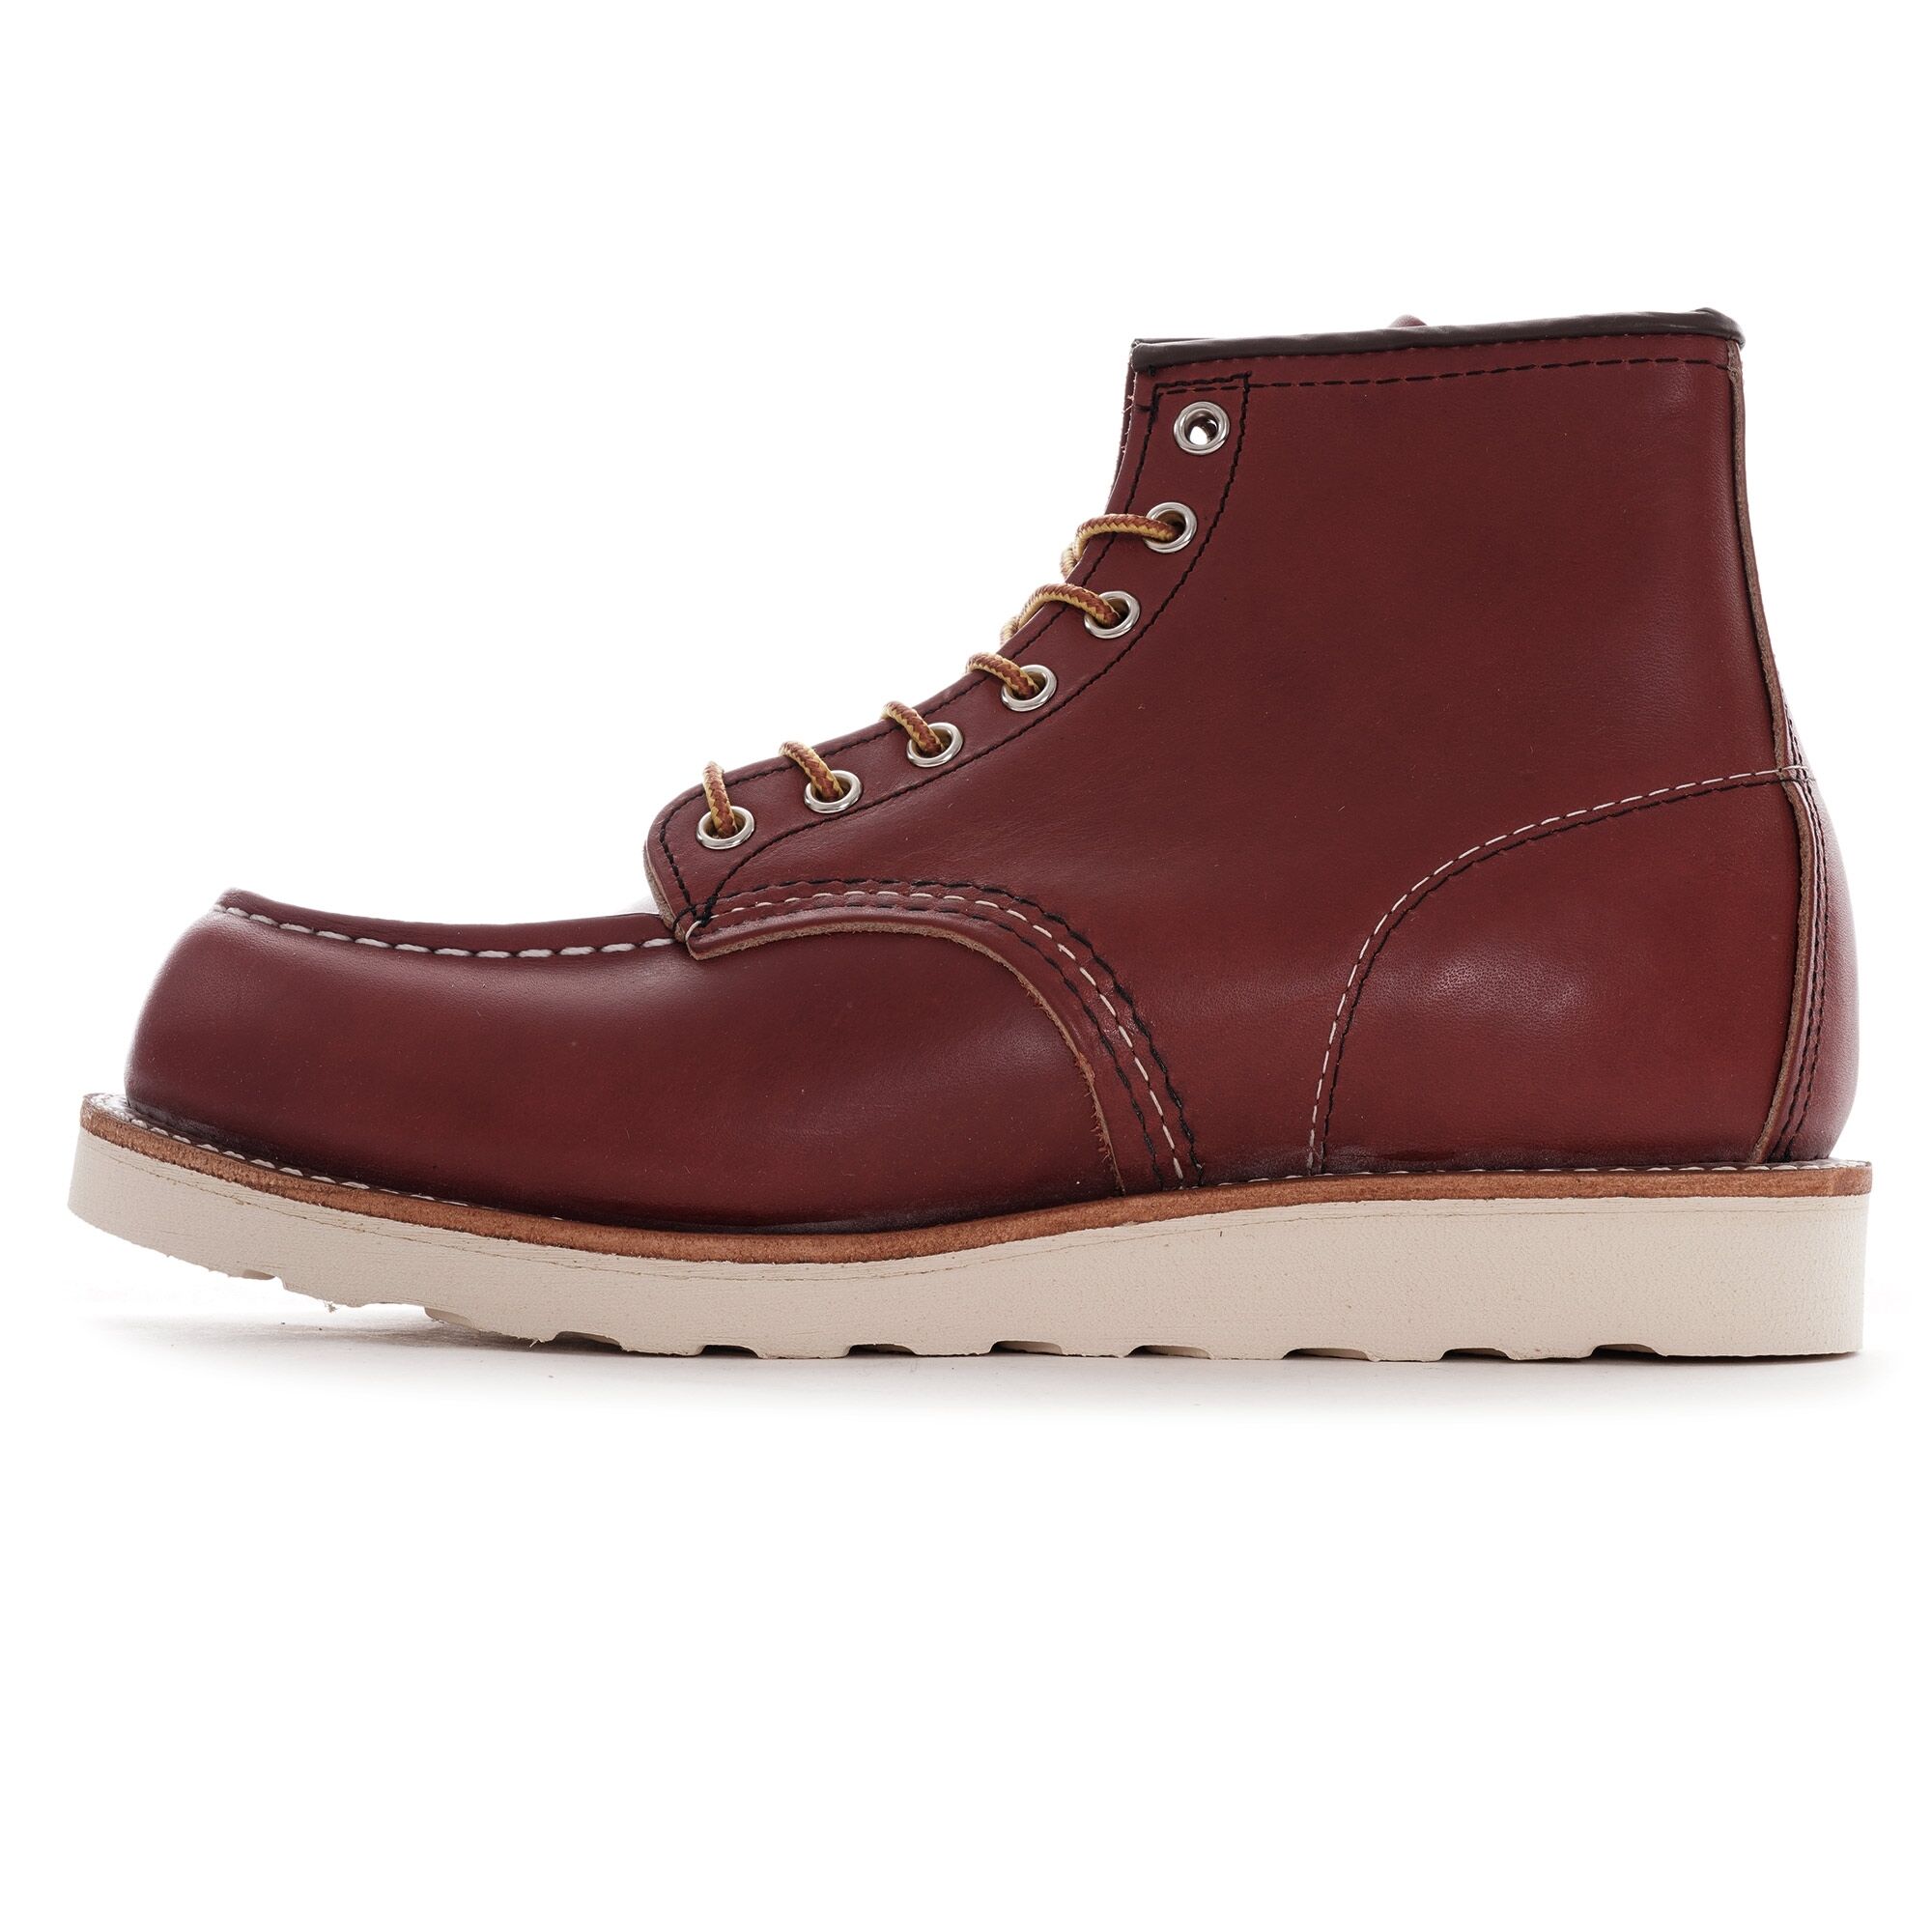 Red Wing Classic Moc Toe Boot - Briar - 8875D-BRN 6 BOOT Colour: Brown - Brown - male - Size: UK 10.5